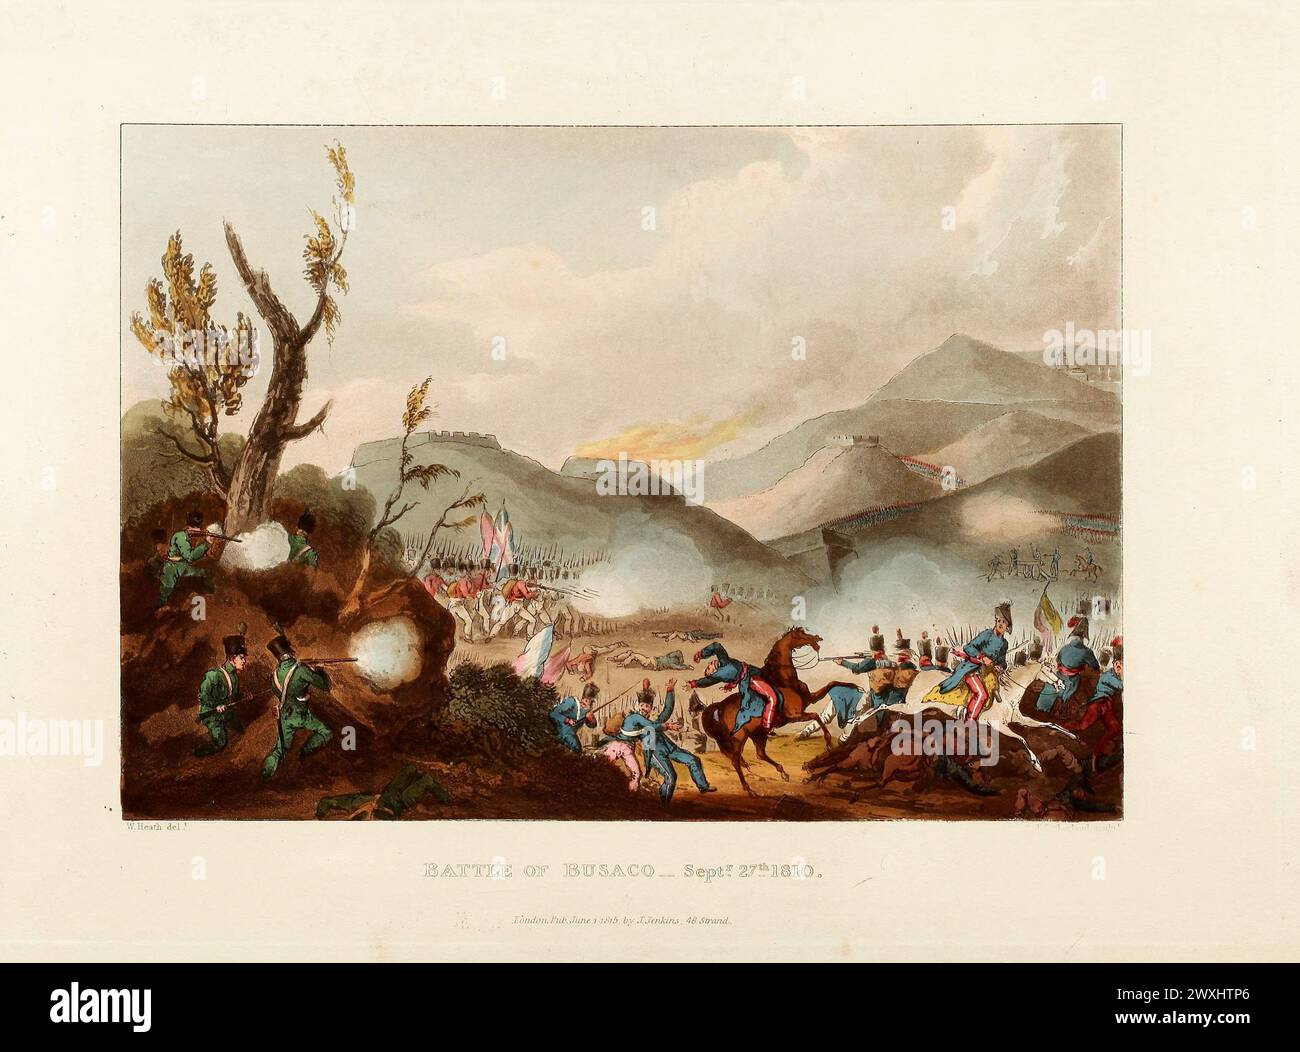 Battle of Busaco, September 27, 1810. Vintage Coloured Aquatint, published by James Jenkins, 1815,  from  The martial achievements of Great Britain and her allies : from 1799 to 1815. Stock Photo